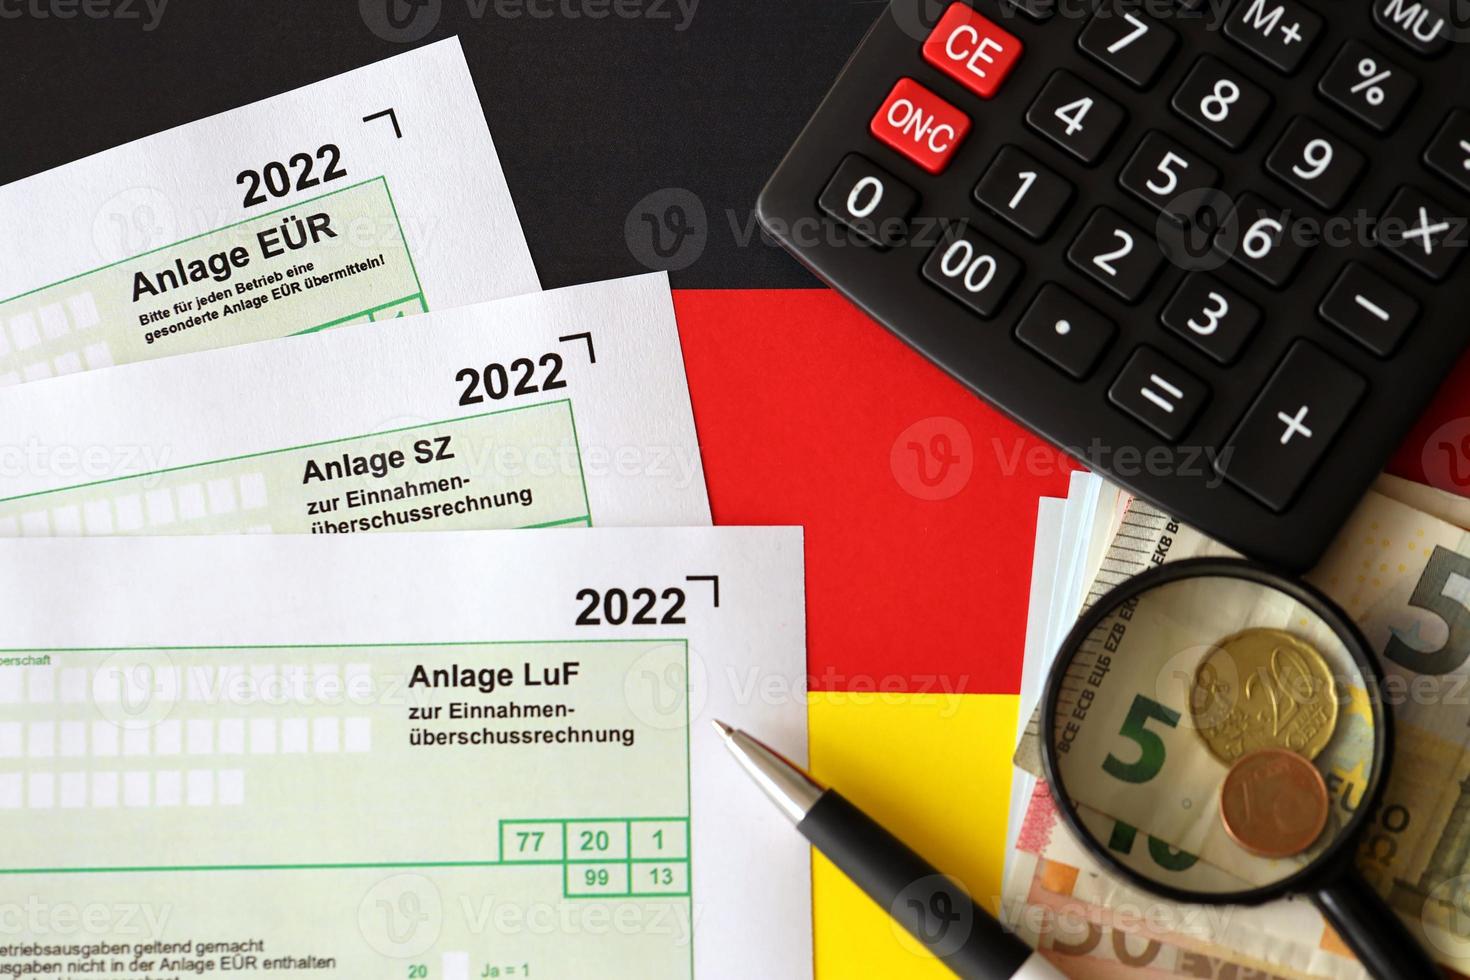 German different tax declaration blank forms - Anlage EUR, Anlage SZ and Anlage Luf. Documents lies with calculator, pen and european money photo